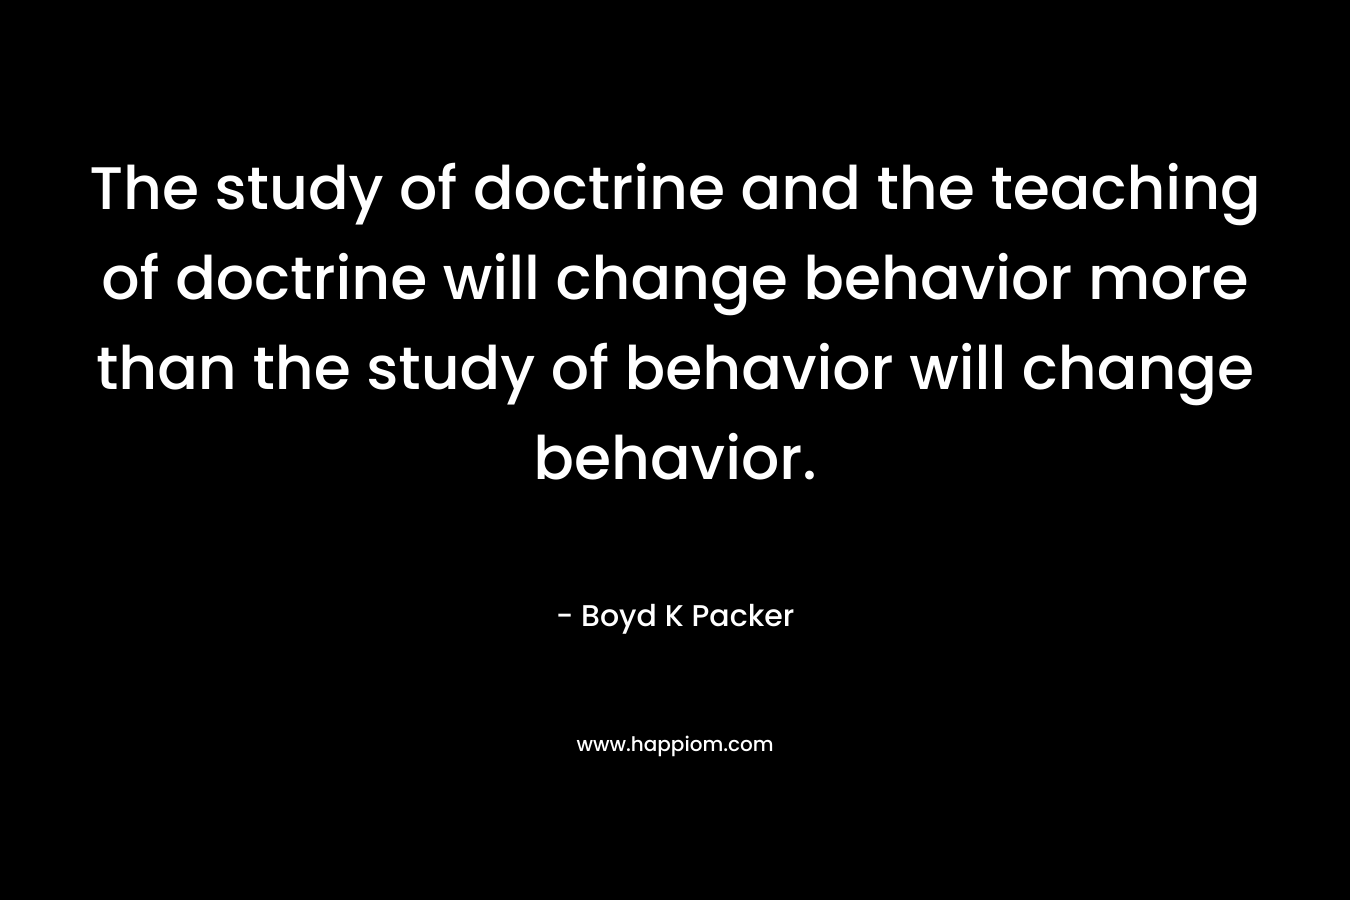 The study of doctrine and the teaching of doctrine will change behavior more than the study of behavior will change behavior. – Boyd K Packer